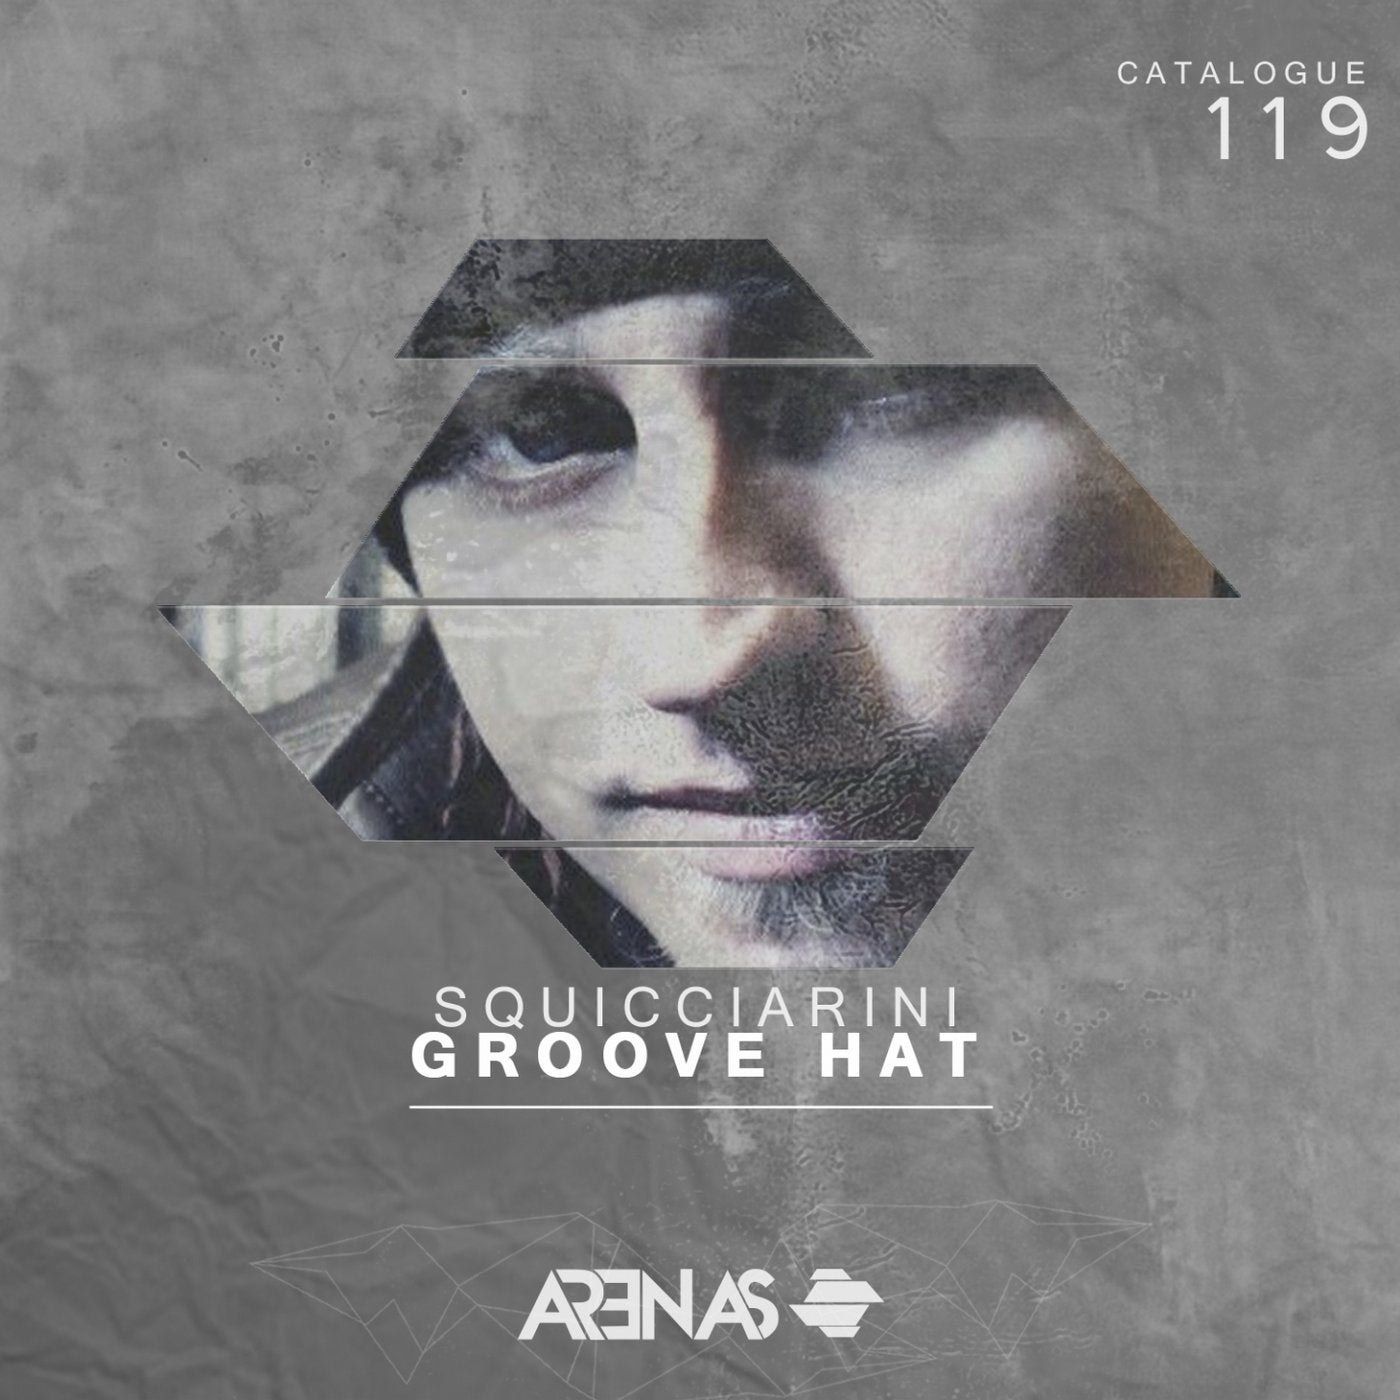 Groove Hat